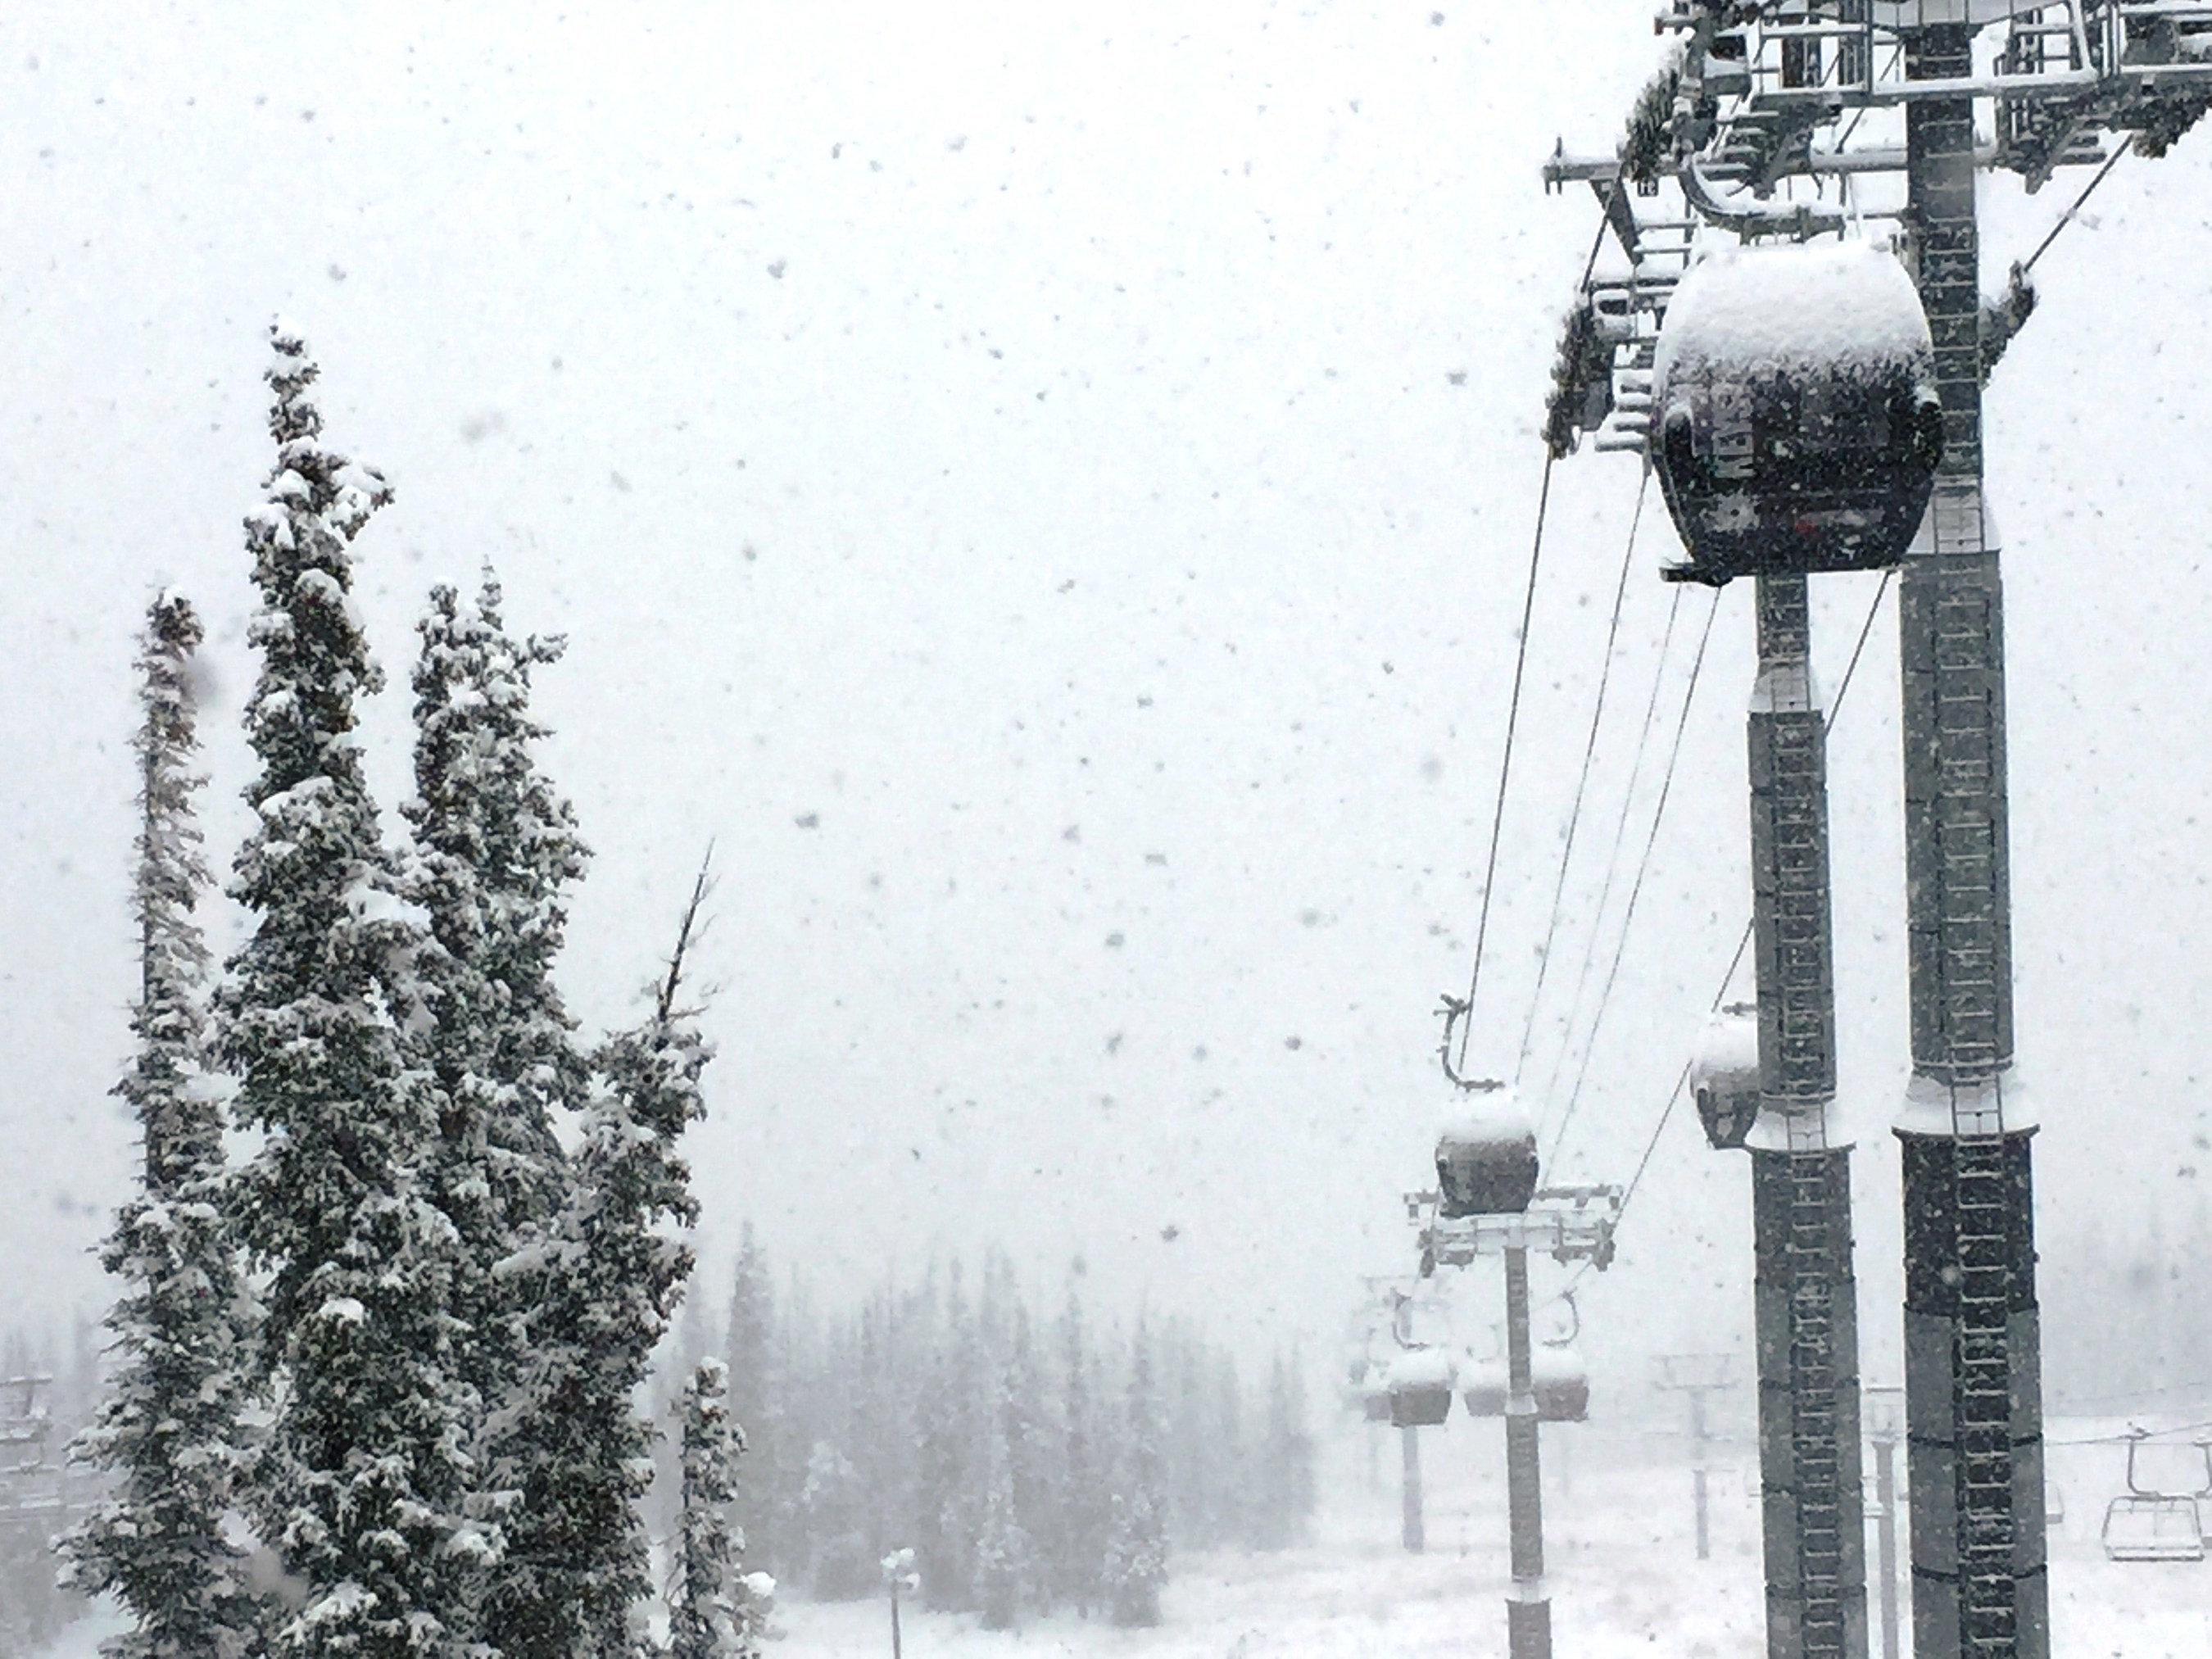 Up to a foot of new snow fell at Colorado's major resorts on Thursday, Oct. 22, 2015. The official arrival of winter weather has blanketed Vail, Beaver Creek, Breckenridge and Keystone Resorts (pictured) with seven to 12 inches of fresh snow. With Keystone opening on Nov. 6 for the 2015-16 winter season, it's the best time to purchase an Epic Pass, which provides unlimited, unrestricted access to the best resorts in Colorado, as well as Park City in Utah, and Heavenly, Northstar and Kirkwood at Lake Tahoe at www.epicpass.com.